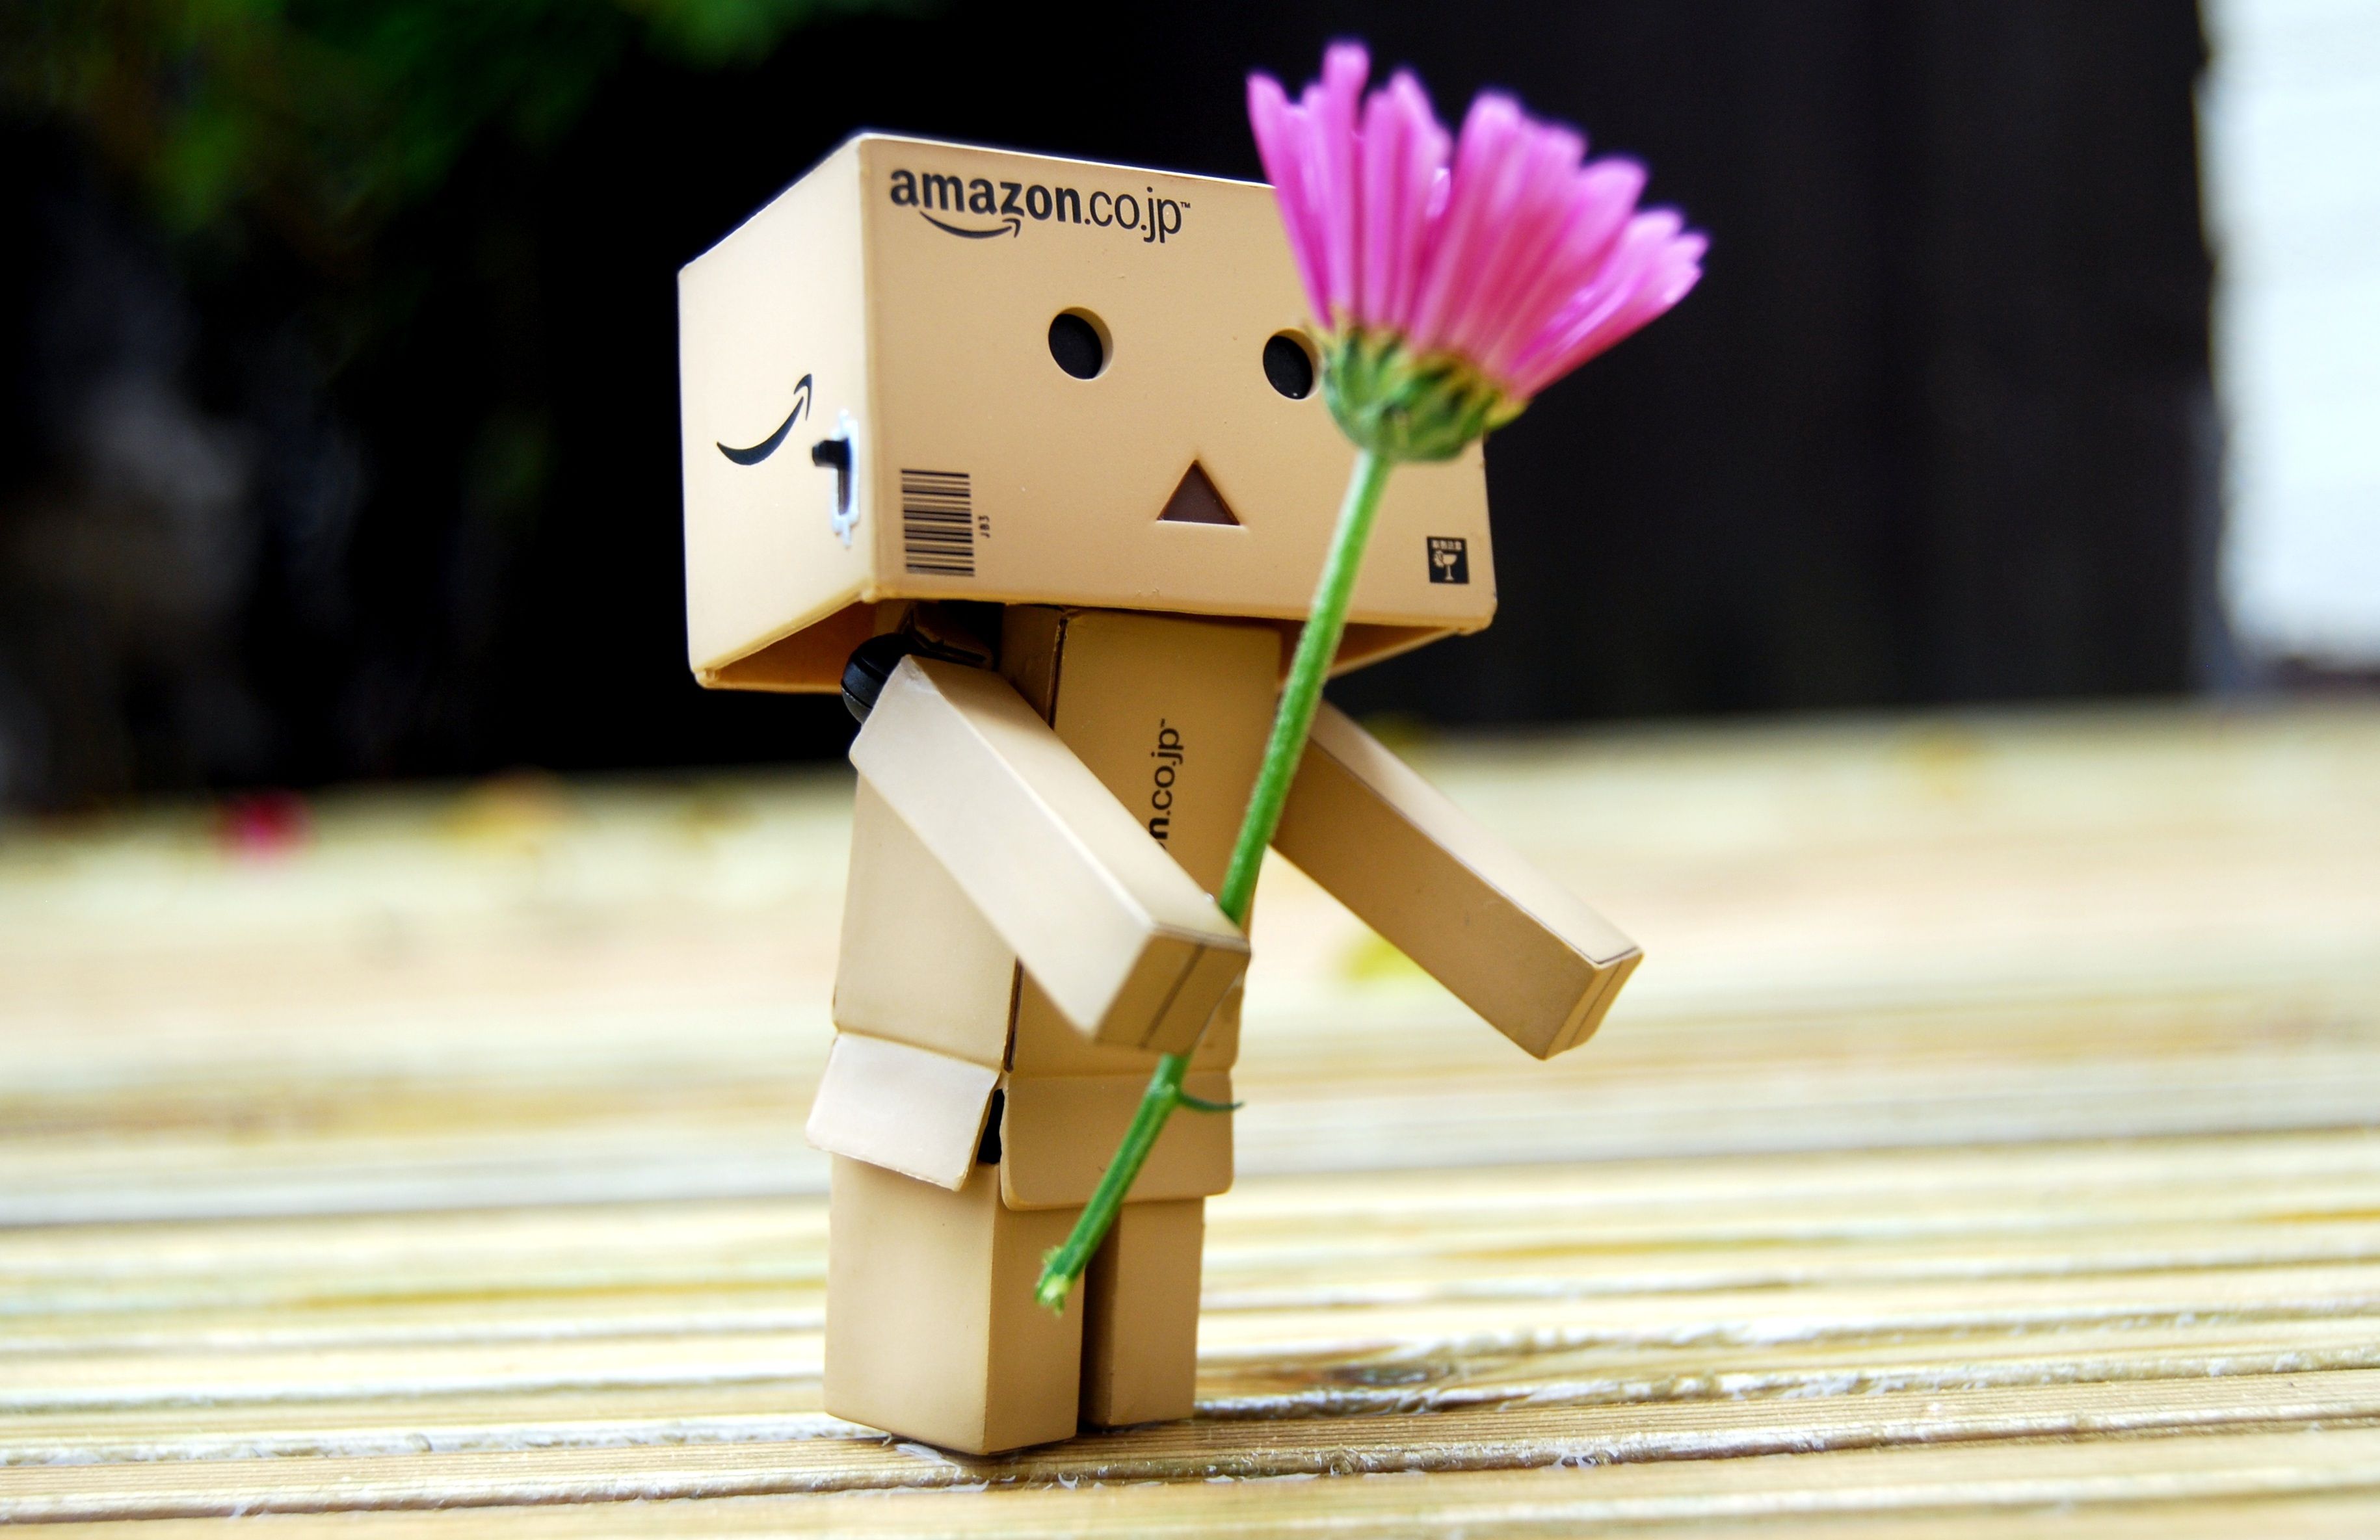 Sutan Ridho On Places To Visit Danbo Box Robot